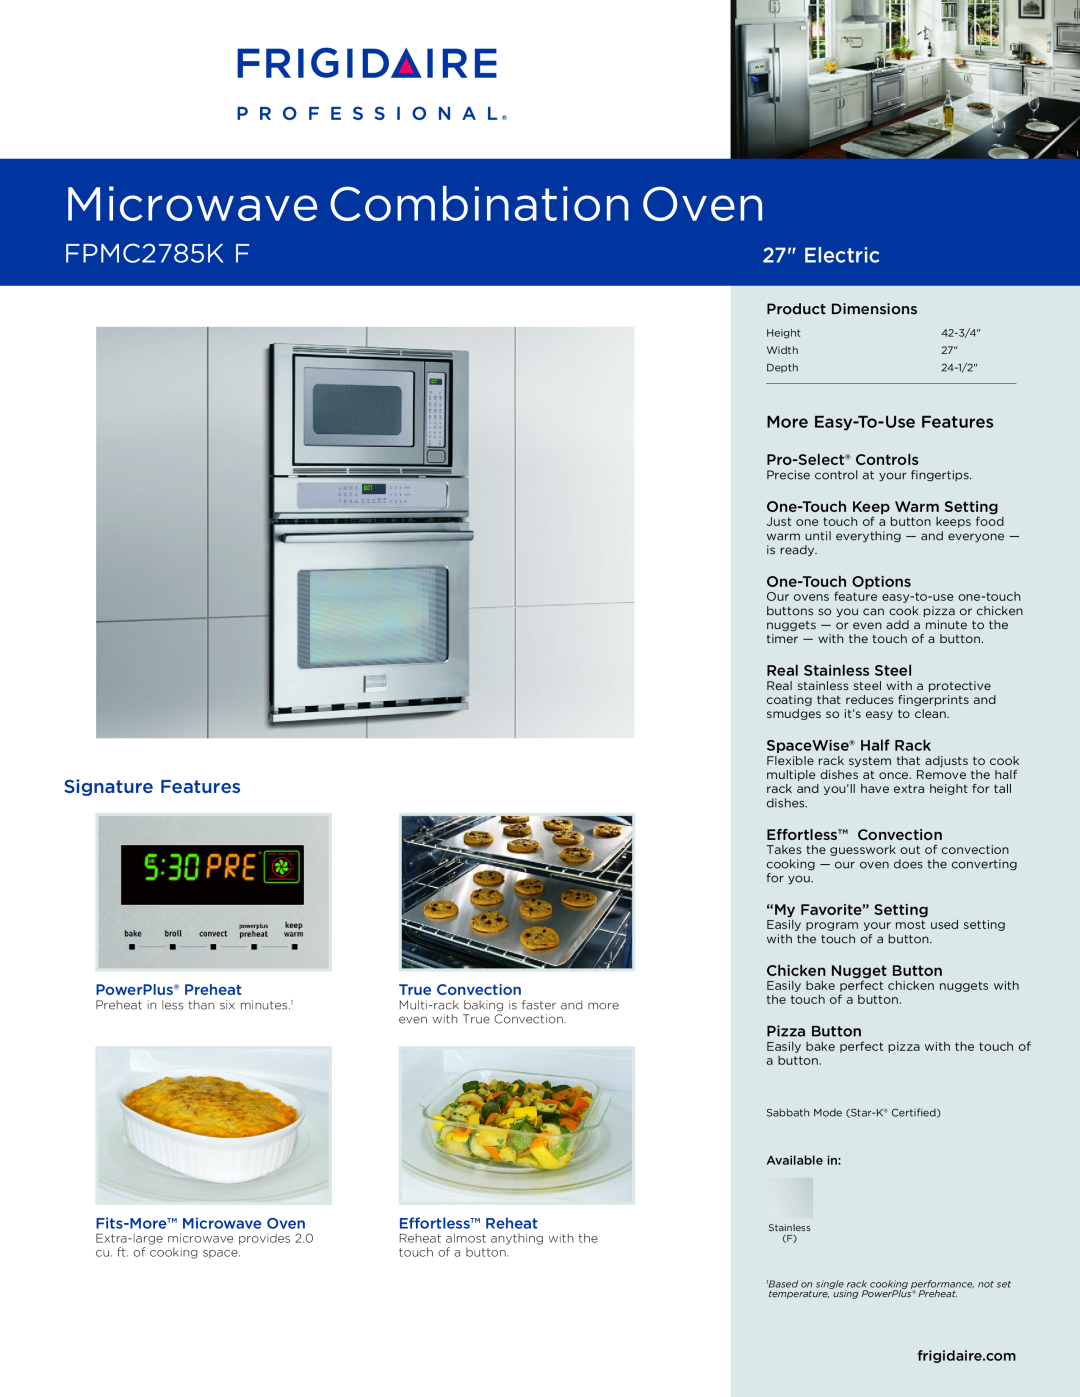 Frigidaire FPMC2785K F dimensions PowerPlus Preheat, True Convection, Fits-More Microwave Oven, Effortless Reheat 